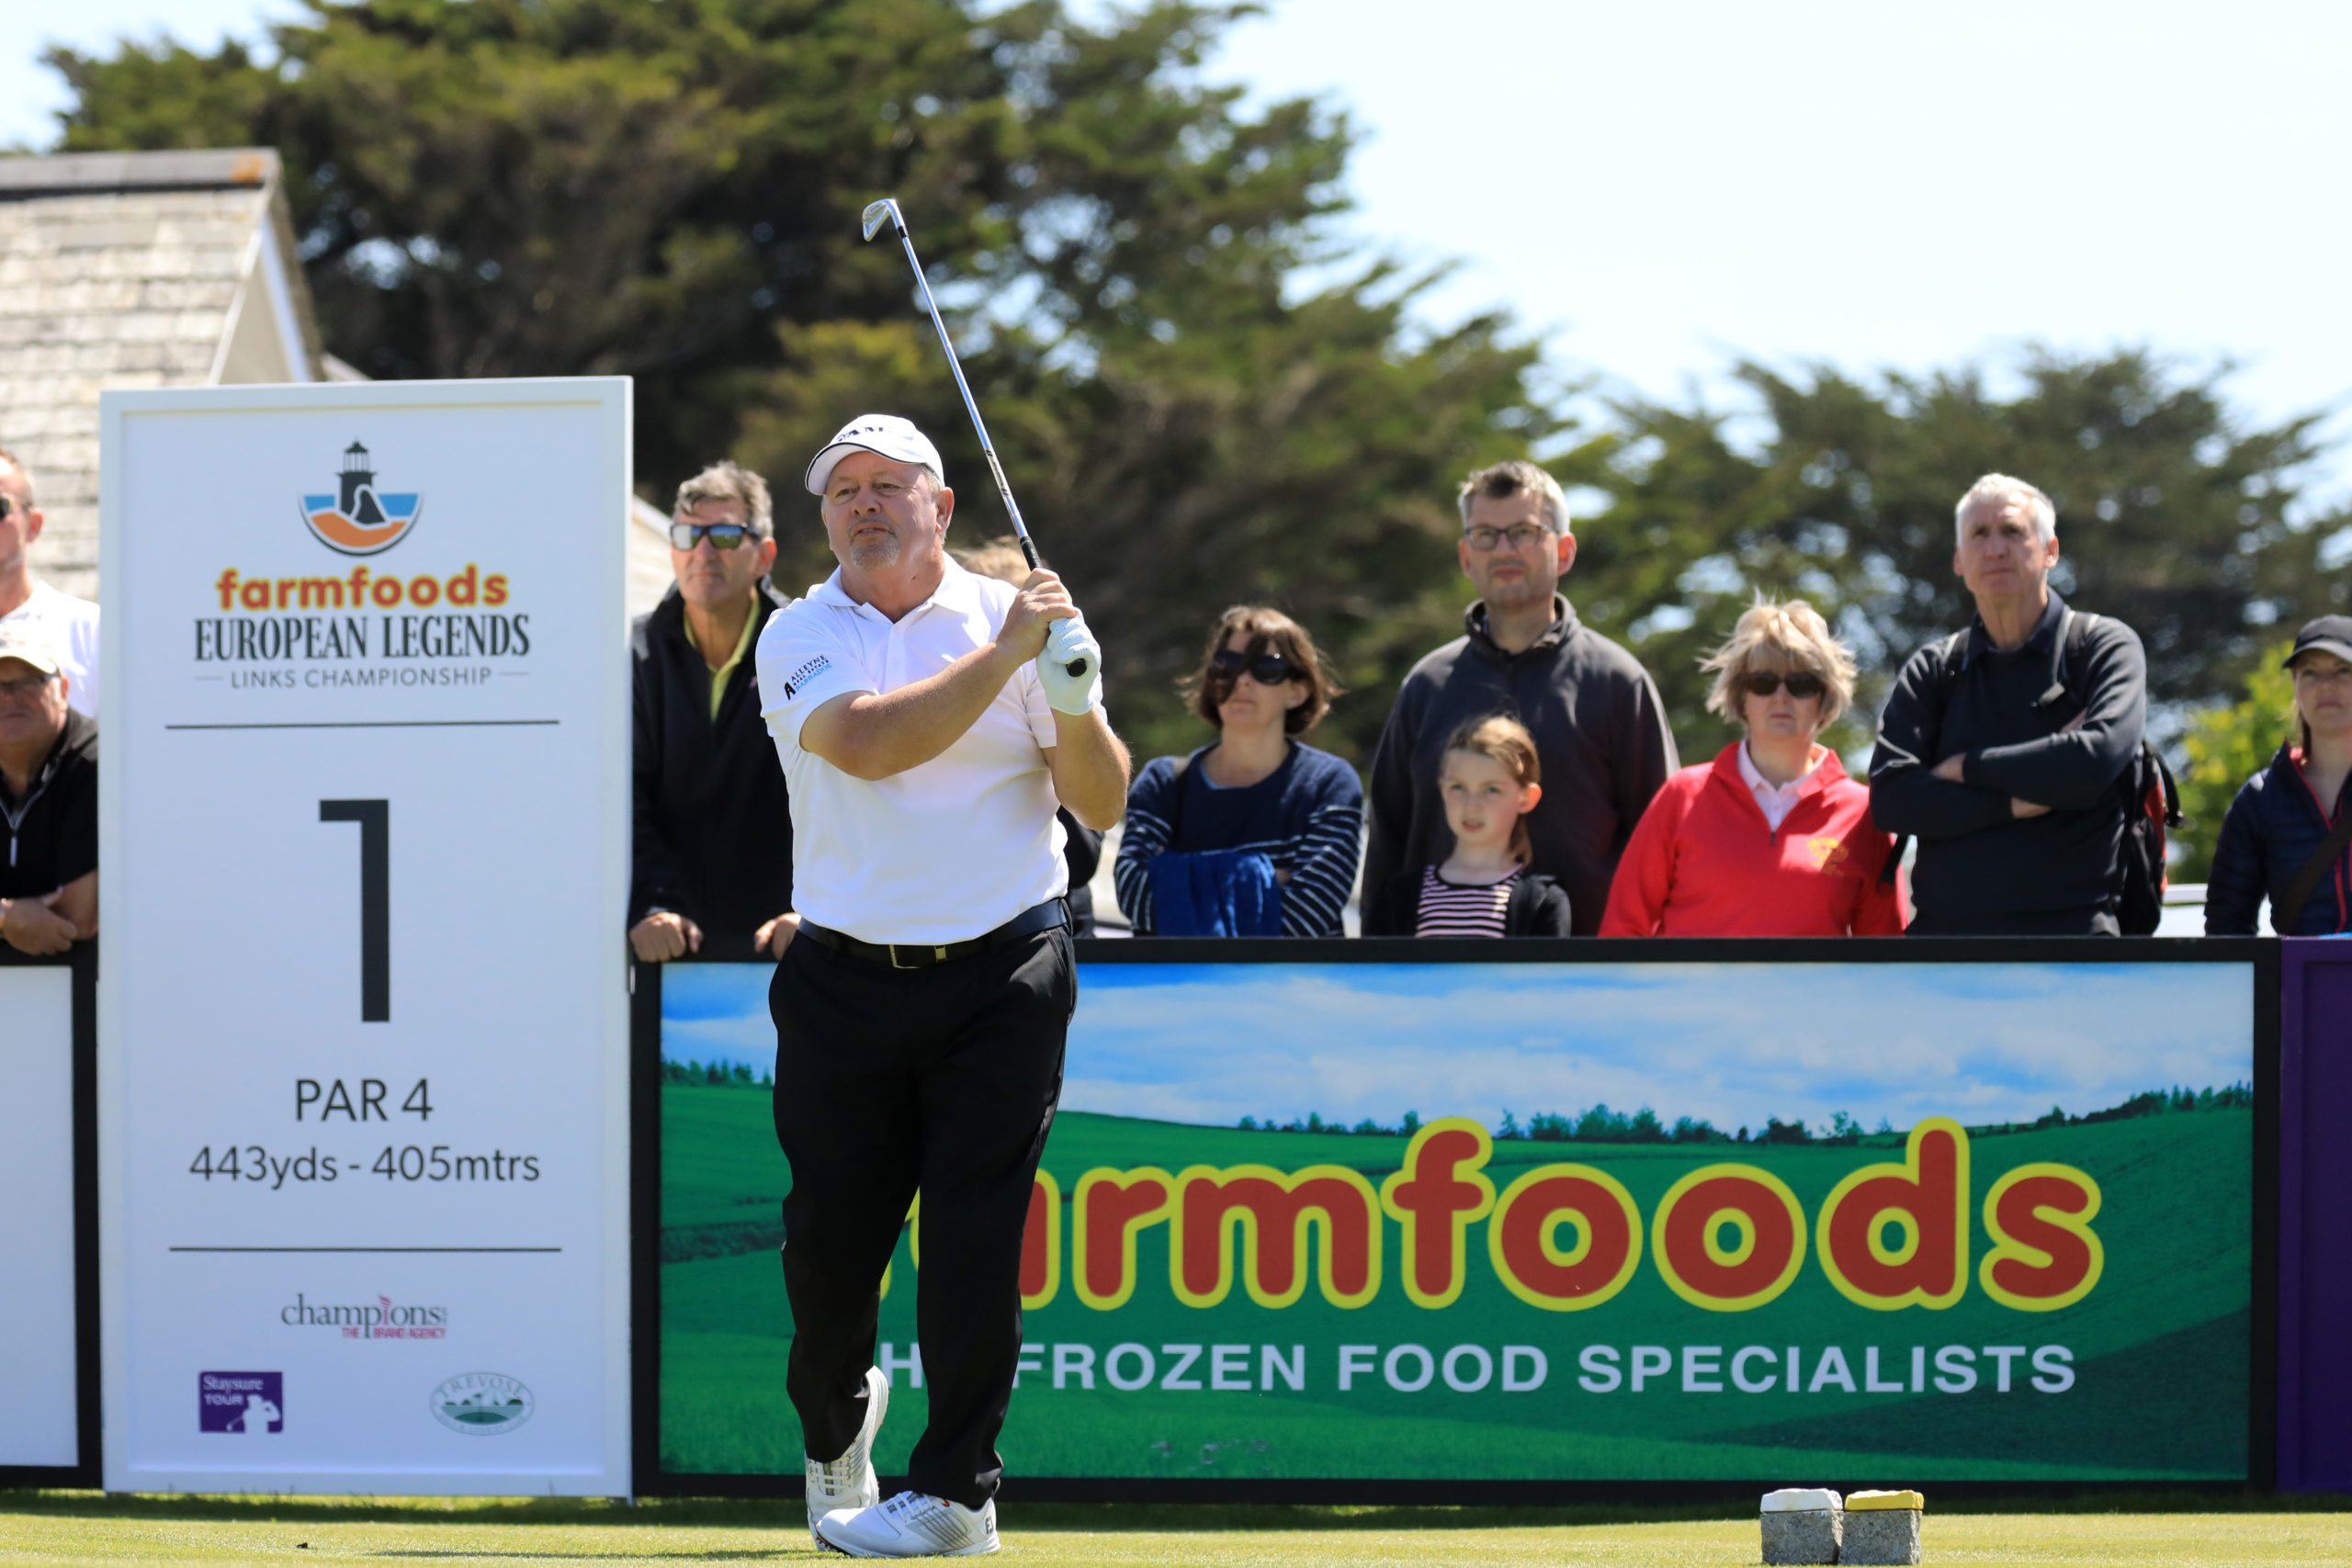 2019 Farmfoods European Legends Links Championship – Day Two